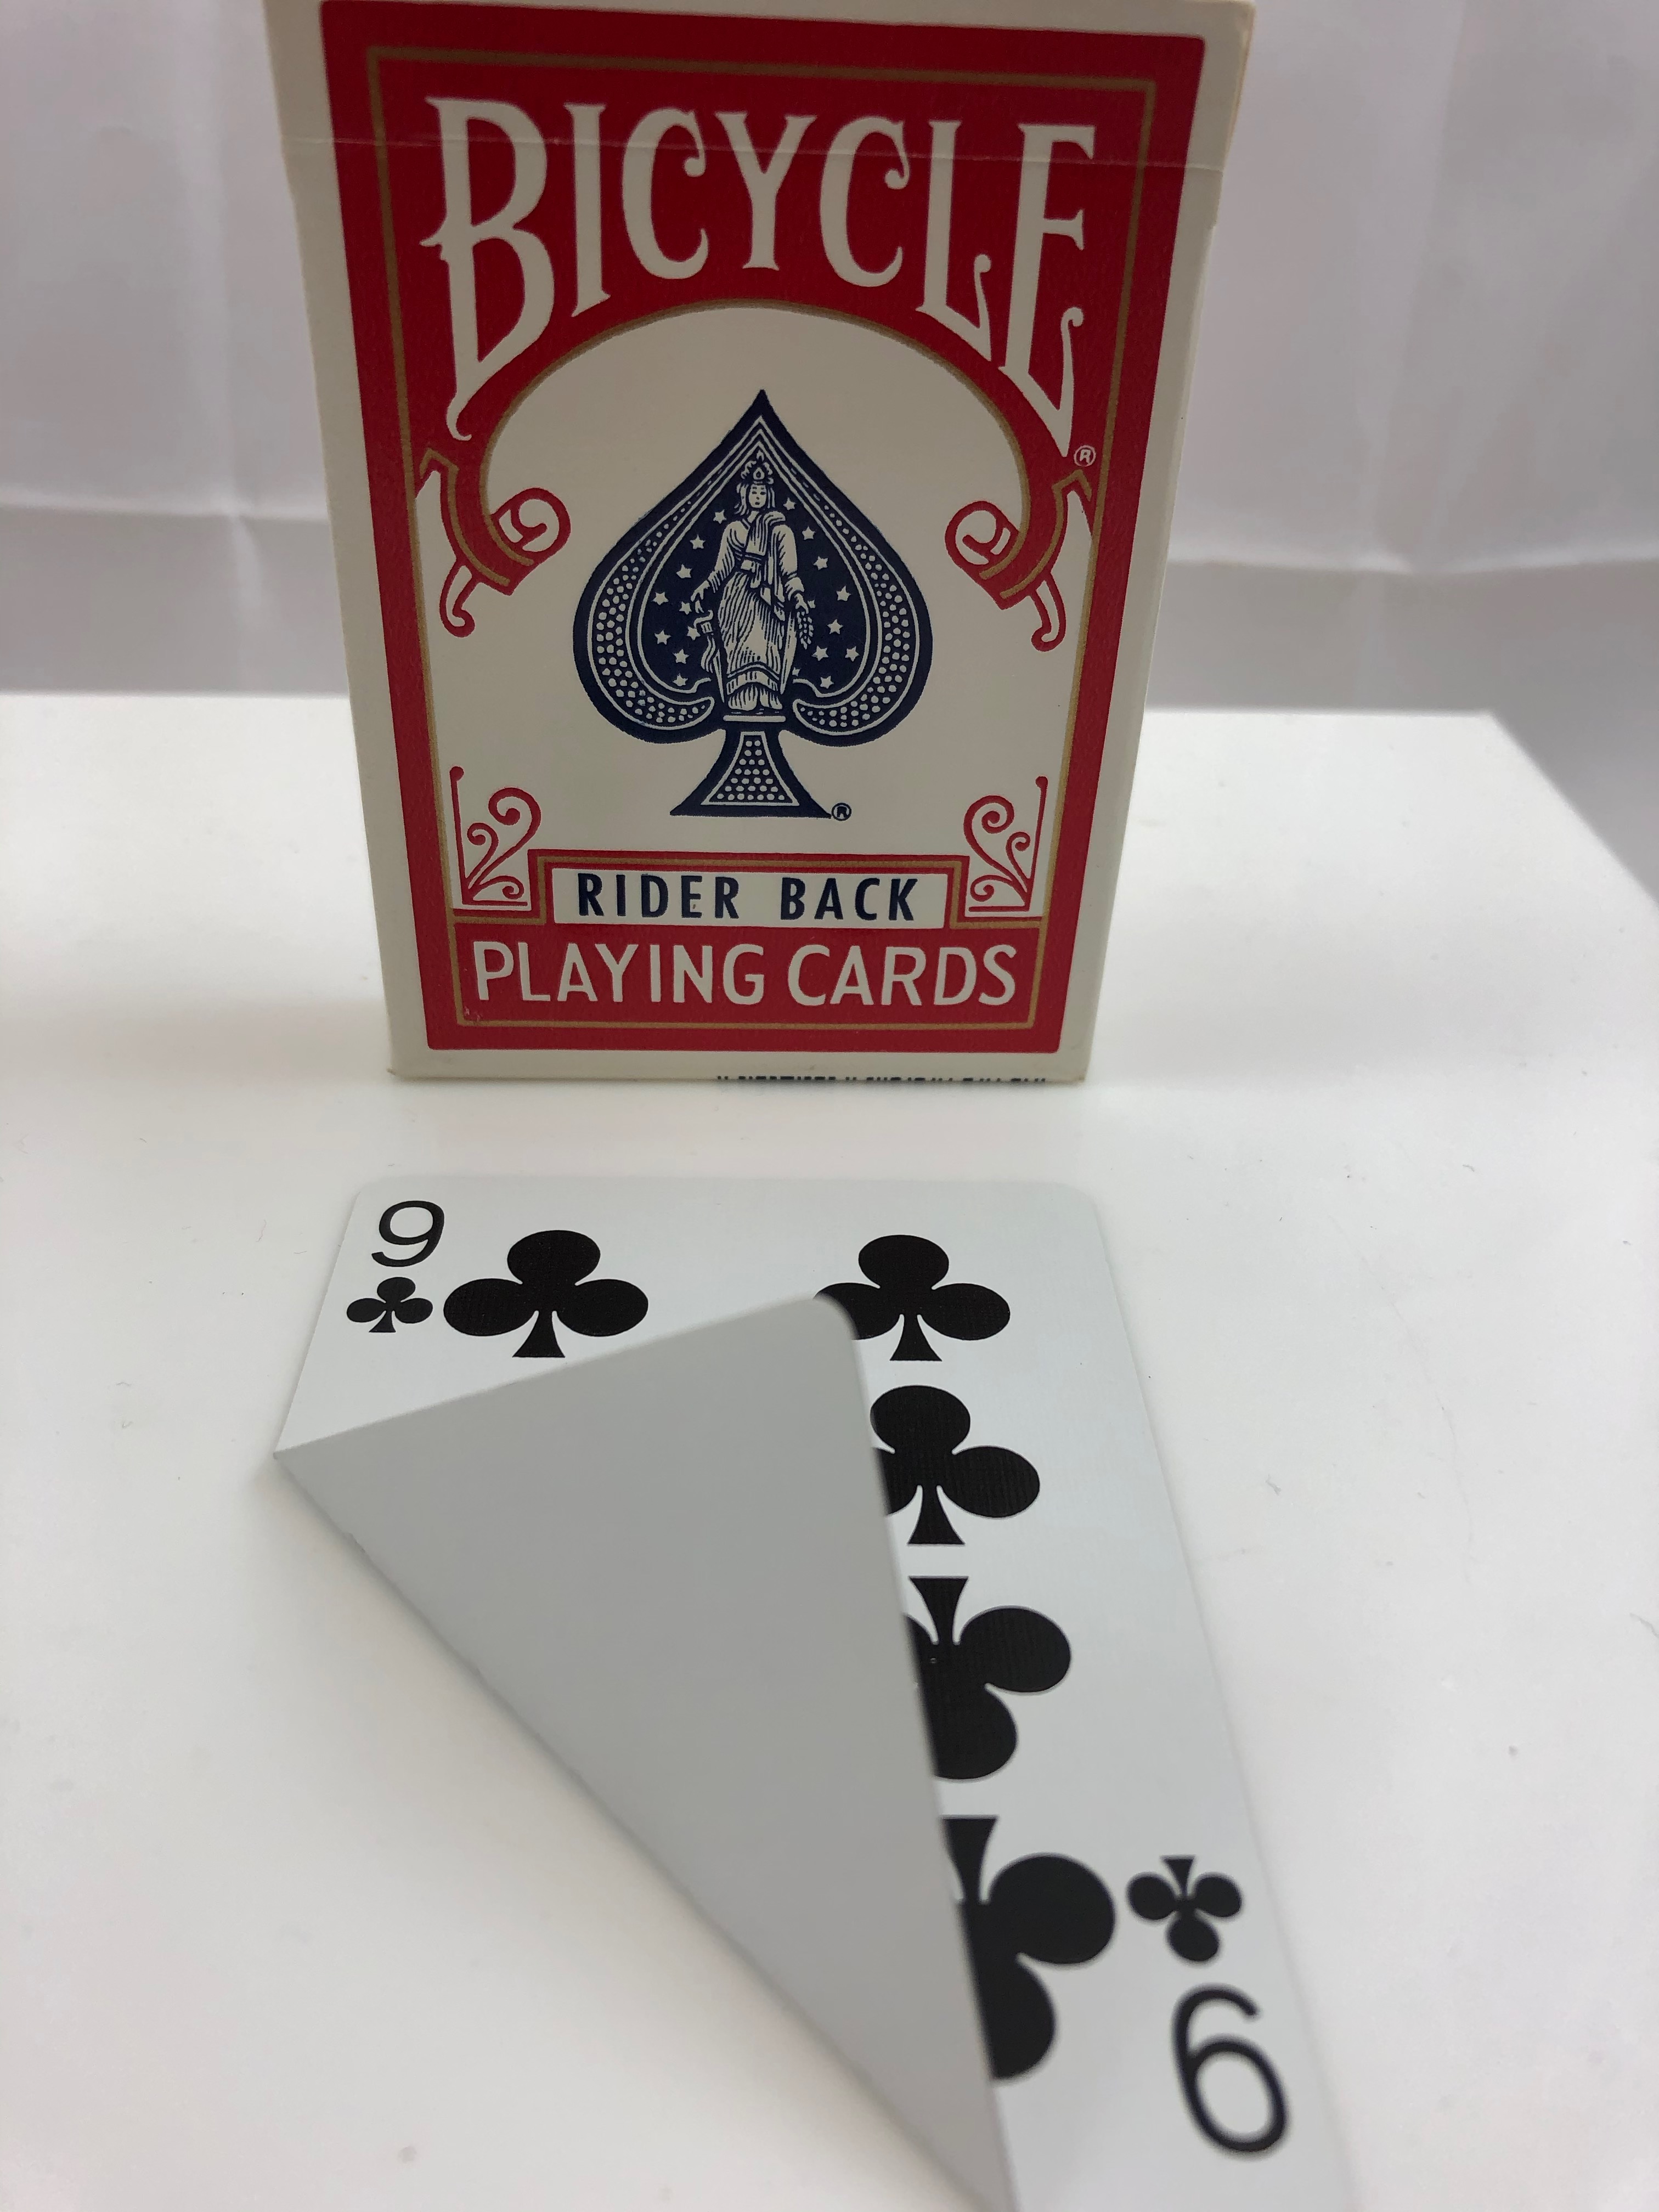 Bicycle Brand Blank Playing Card Deck